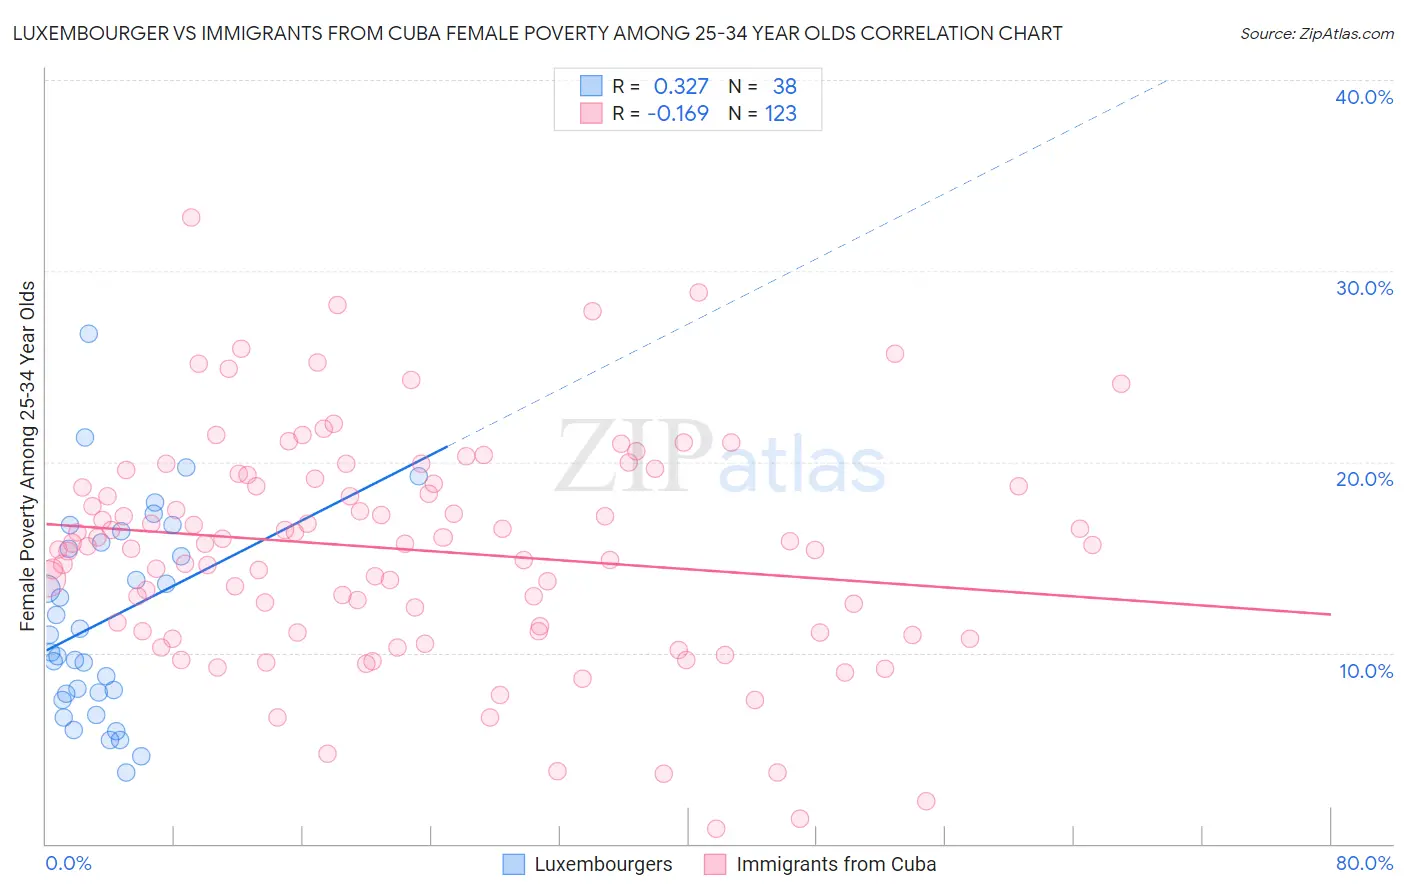 Luxembourger vs Immigrants from Cuba Female Poverty Among 25-34 Year Olds